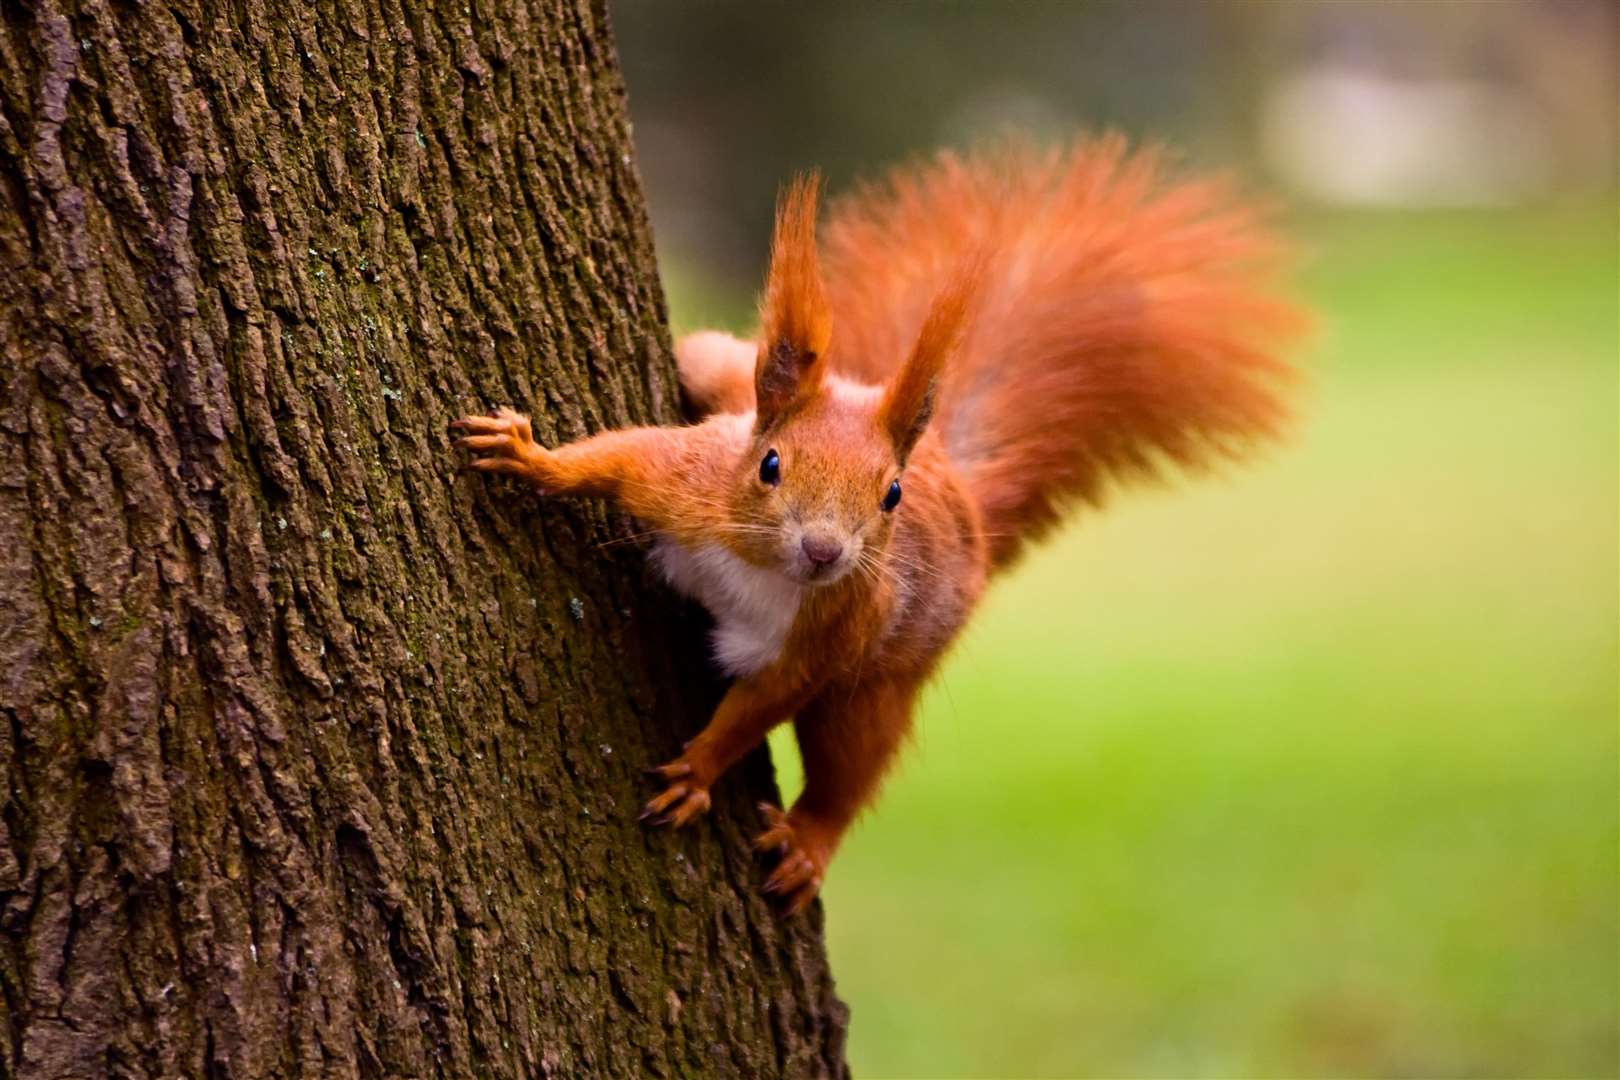 Red squirrels enjoy the forests in the area.